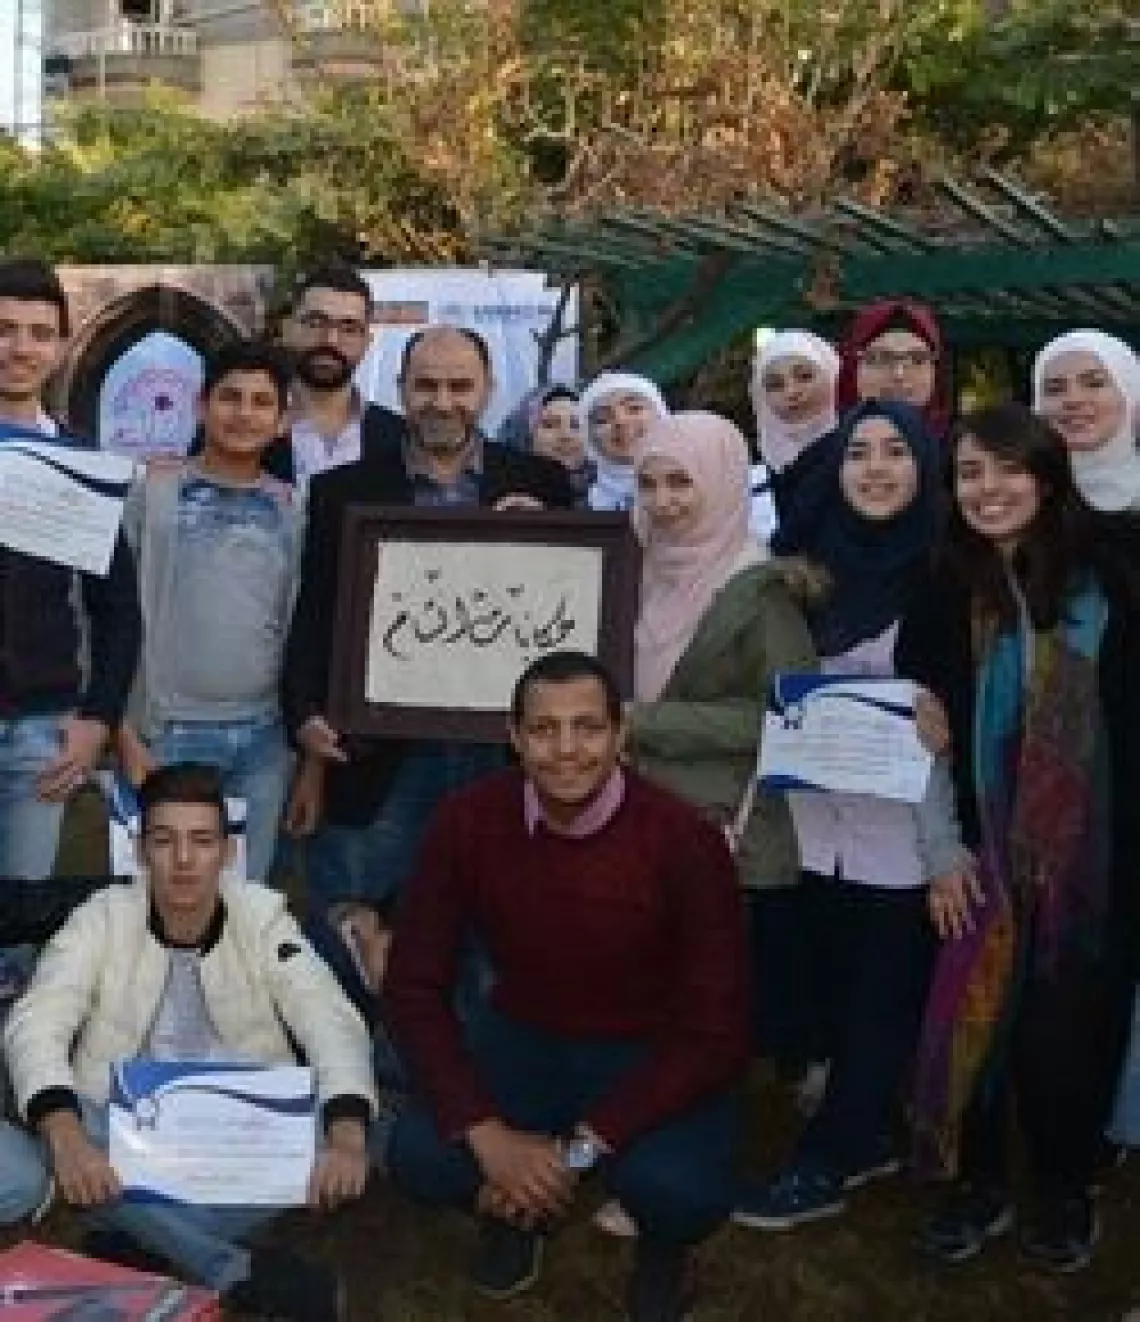 A group of young Syrian women and men outside with one man holding a placard.